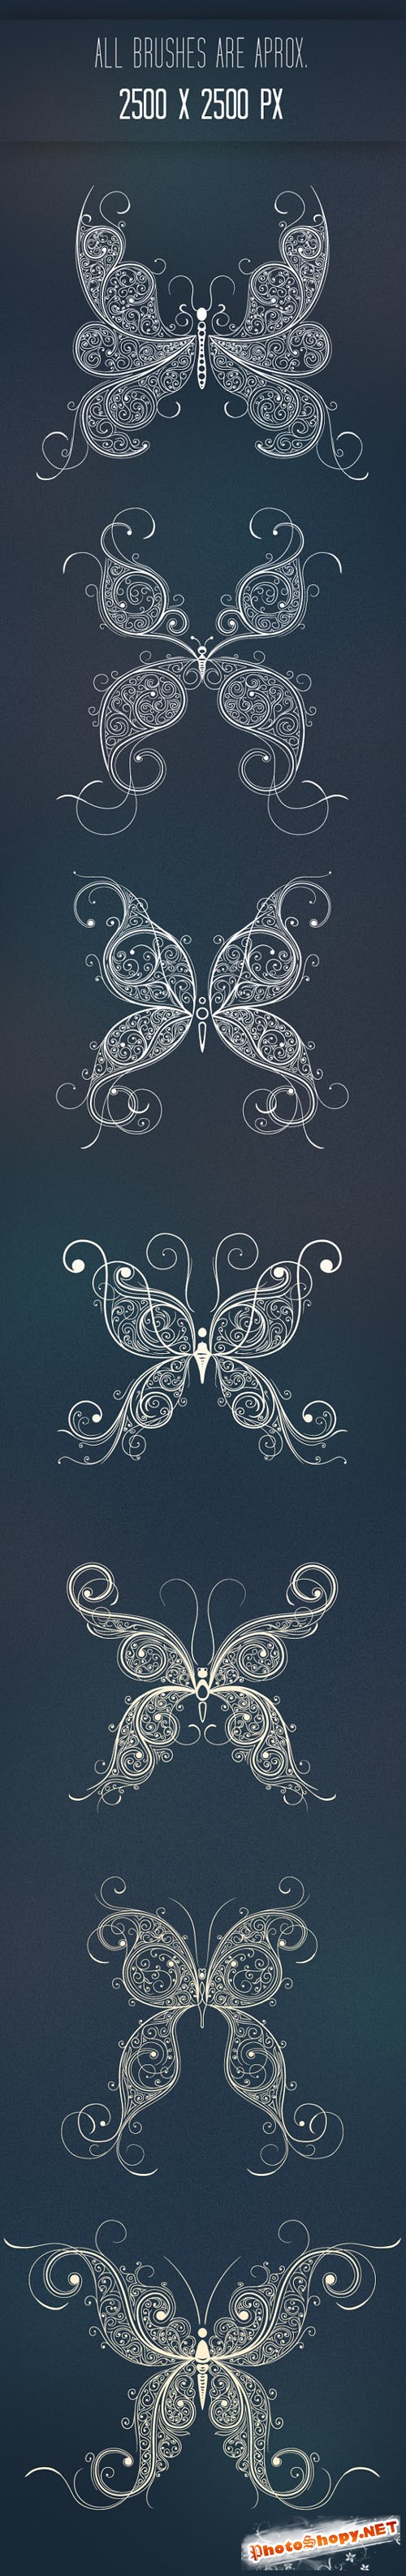 Butterflies Abstract Photoshop ABR Brushes